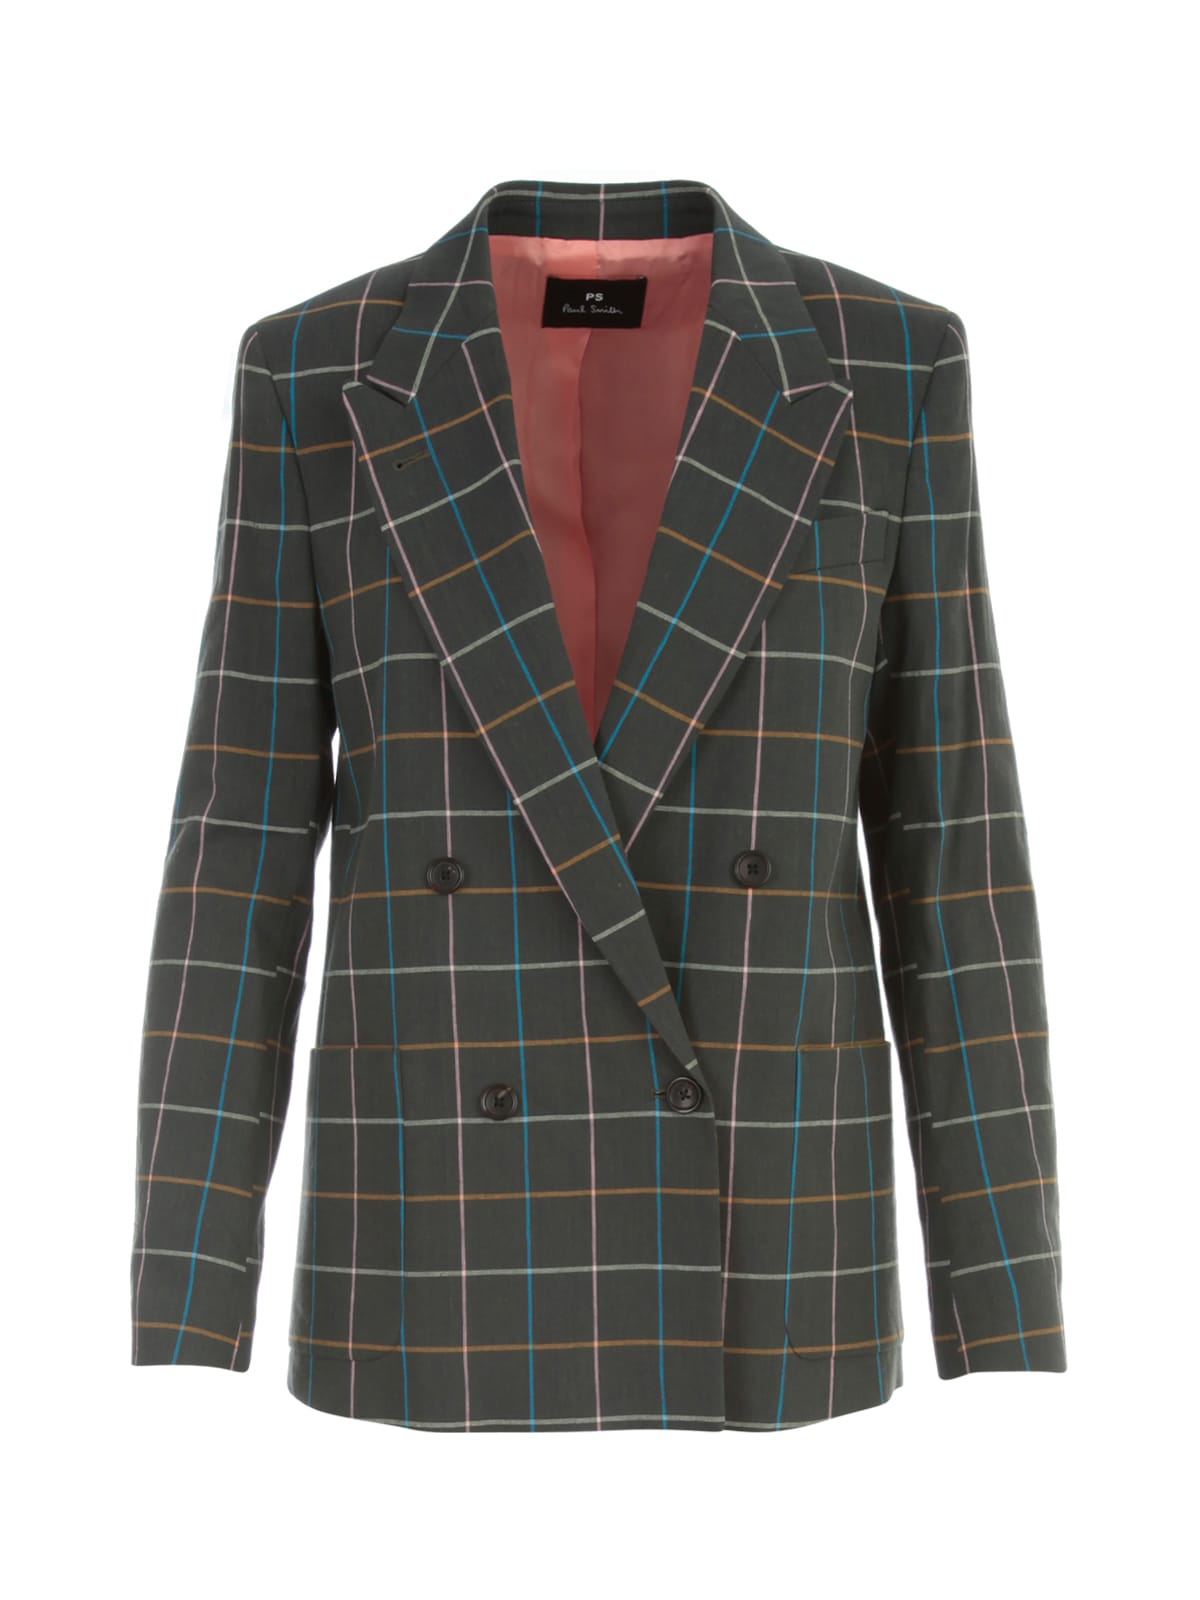 PS by Paul Smith Checked Jacket